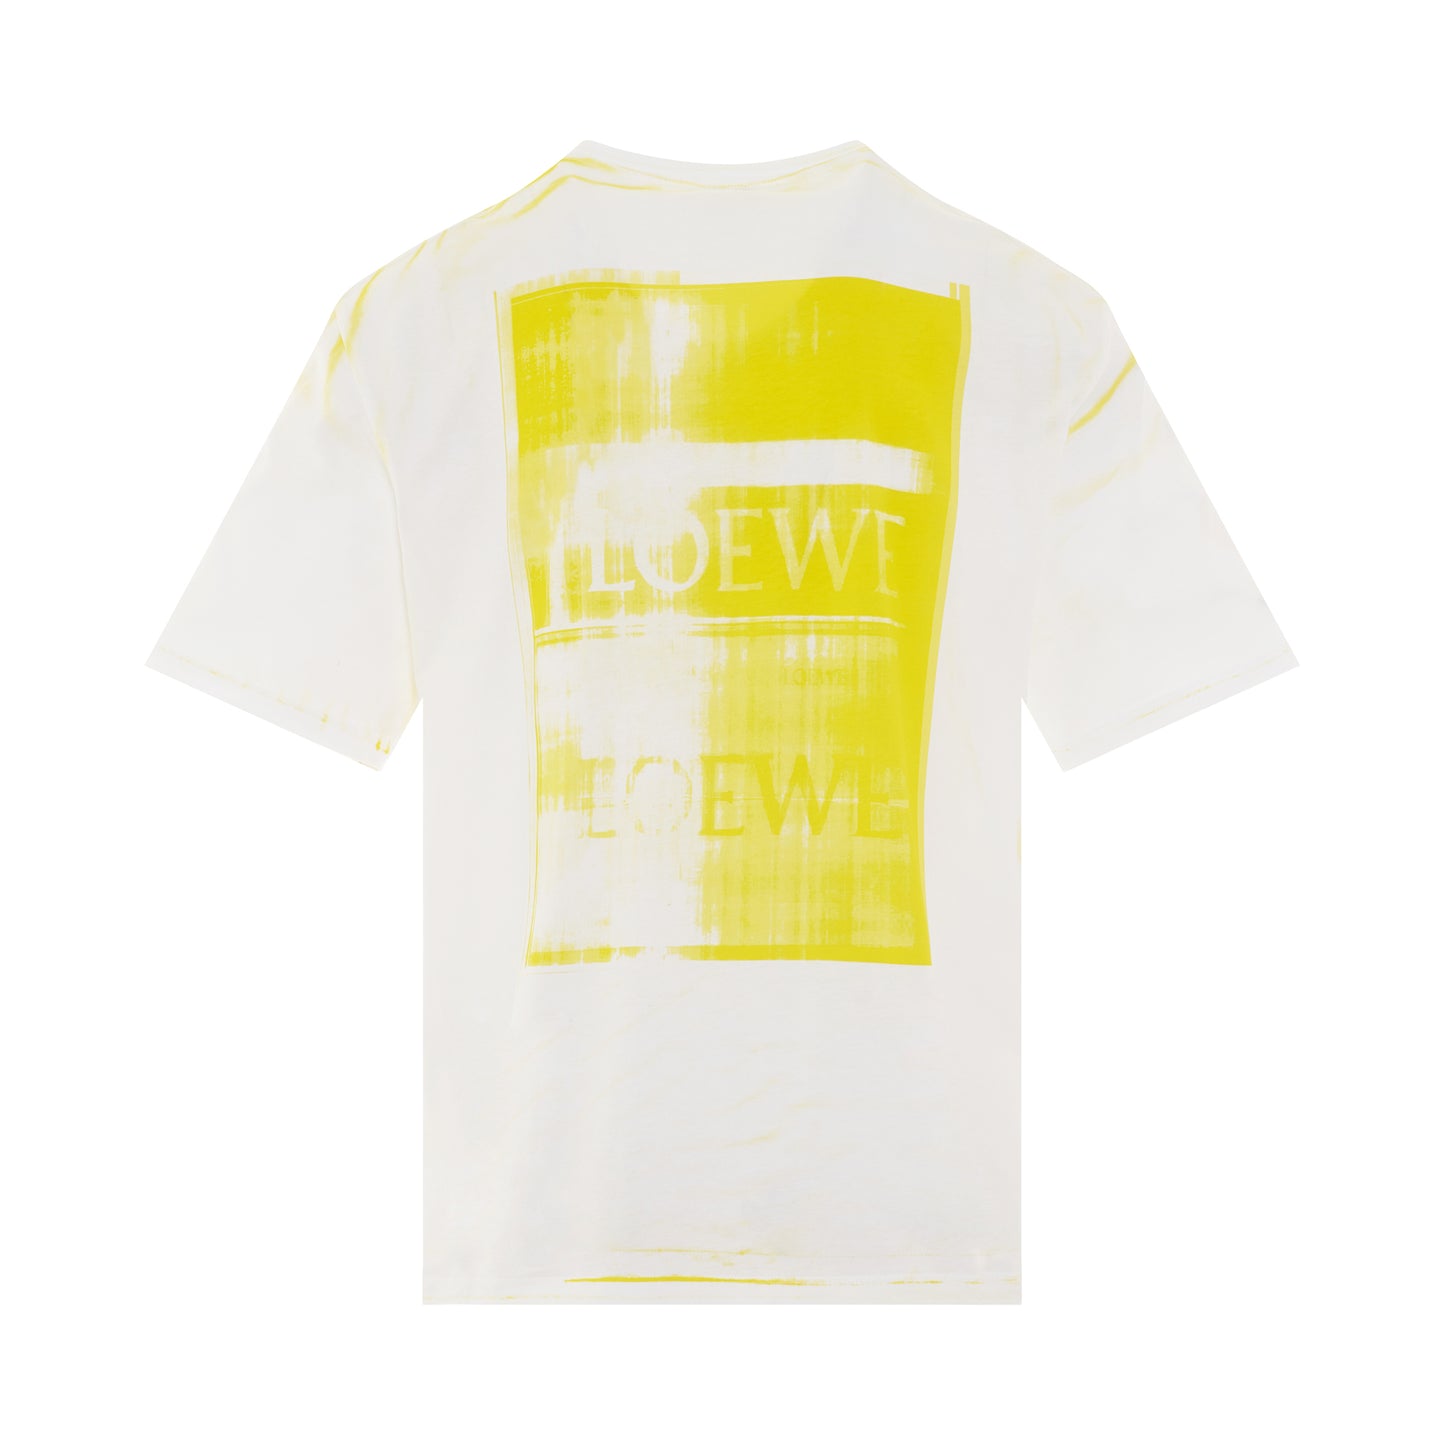 Photocopy Anagram T-Shirt in White/Yellow